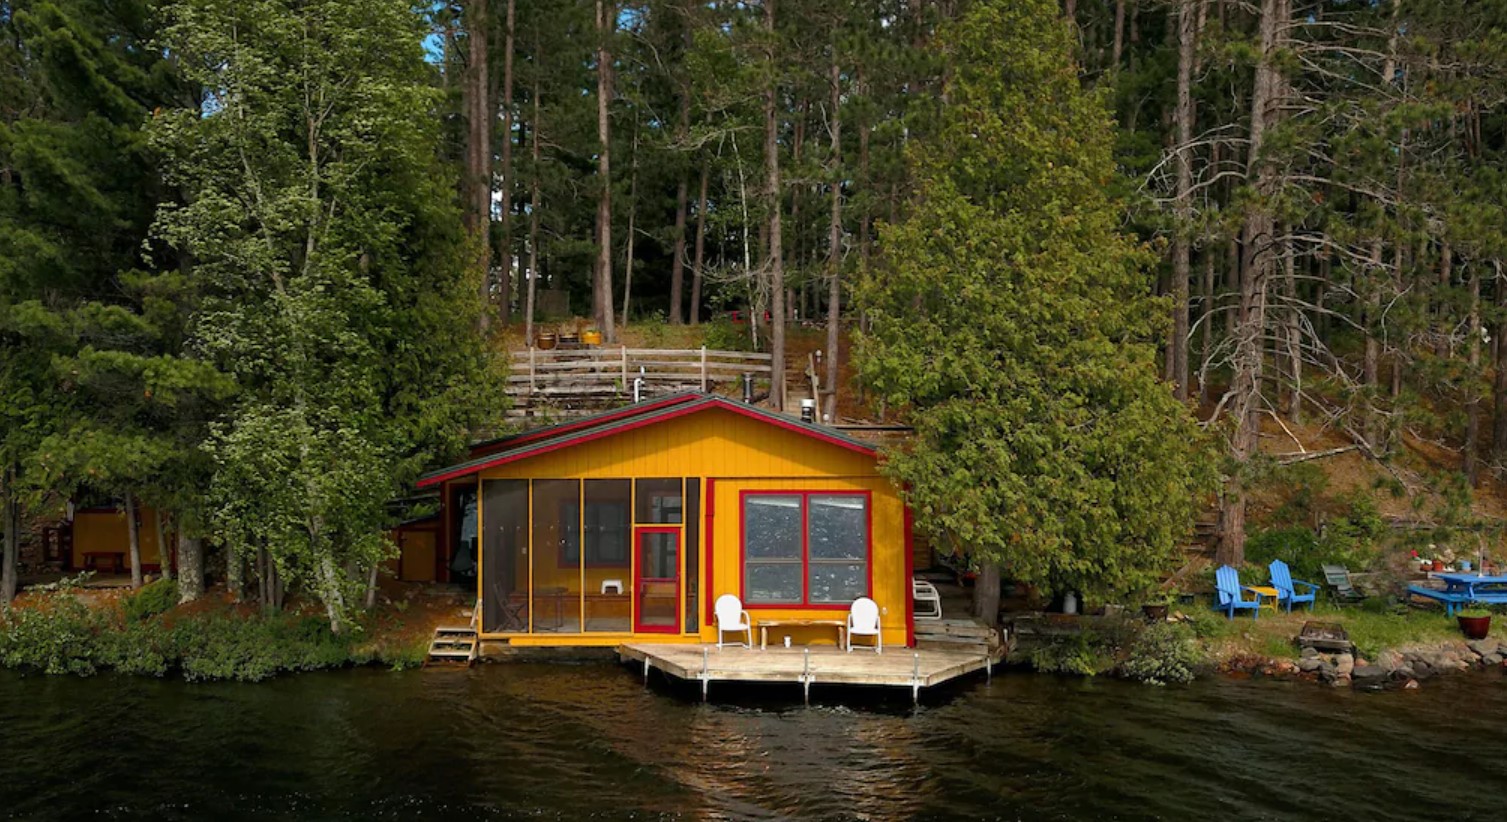 One of the best cabins in Minnesota that is right on the lake surrounded by a dense forest